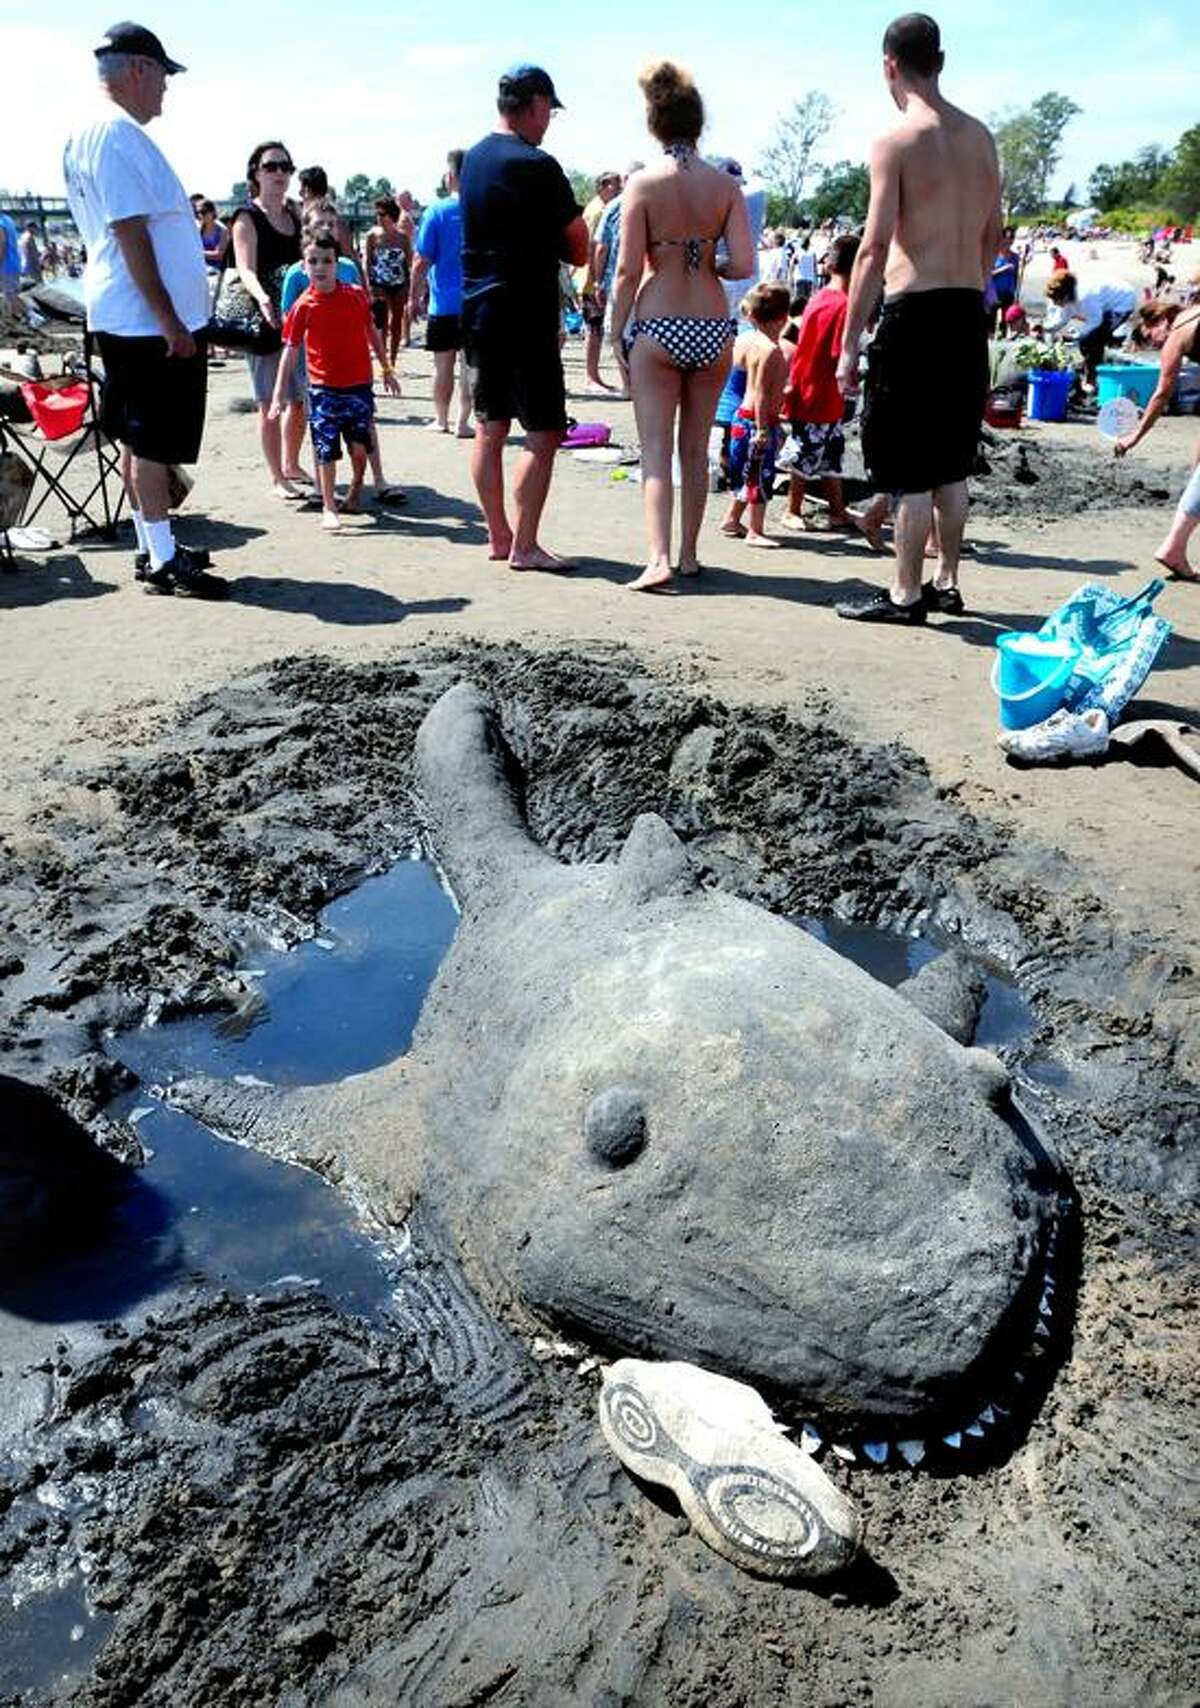 One of several sharks created at the Great American Sand Sculpture Competition in Milford awaits judging on 8/25/2012.Photo by Arnold Gold/New Haven Register